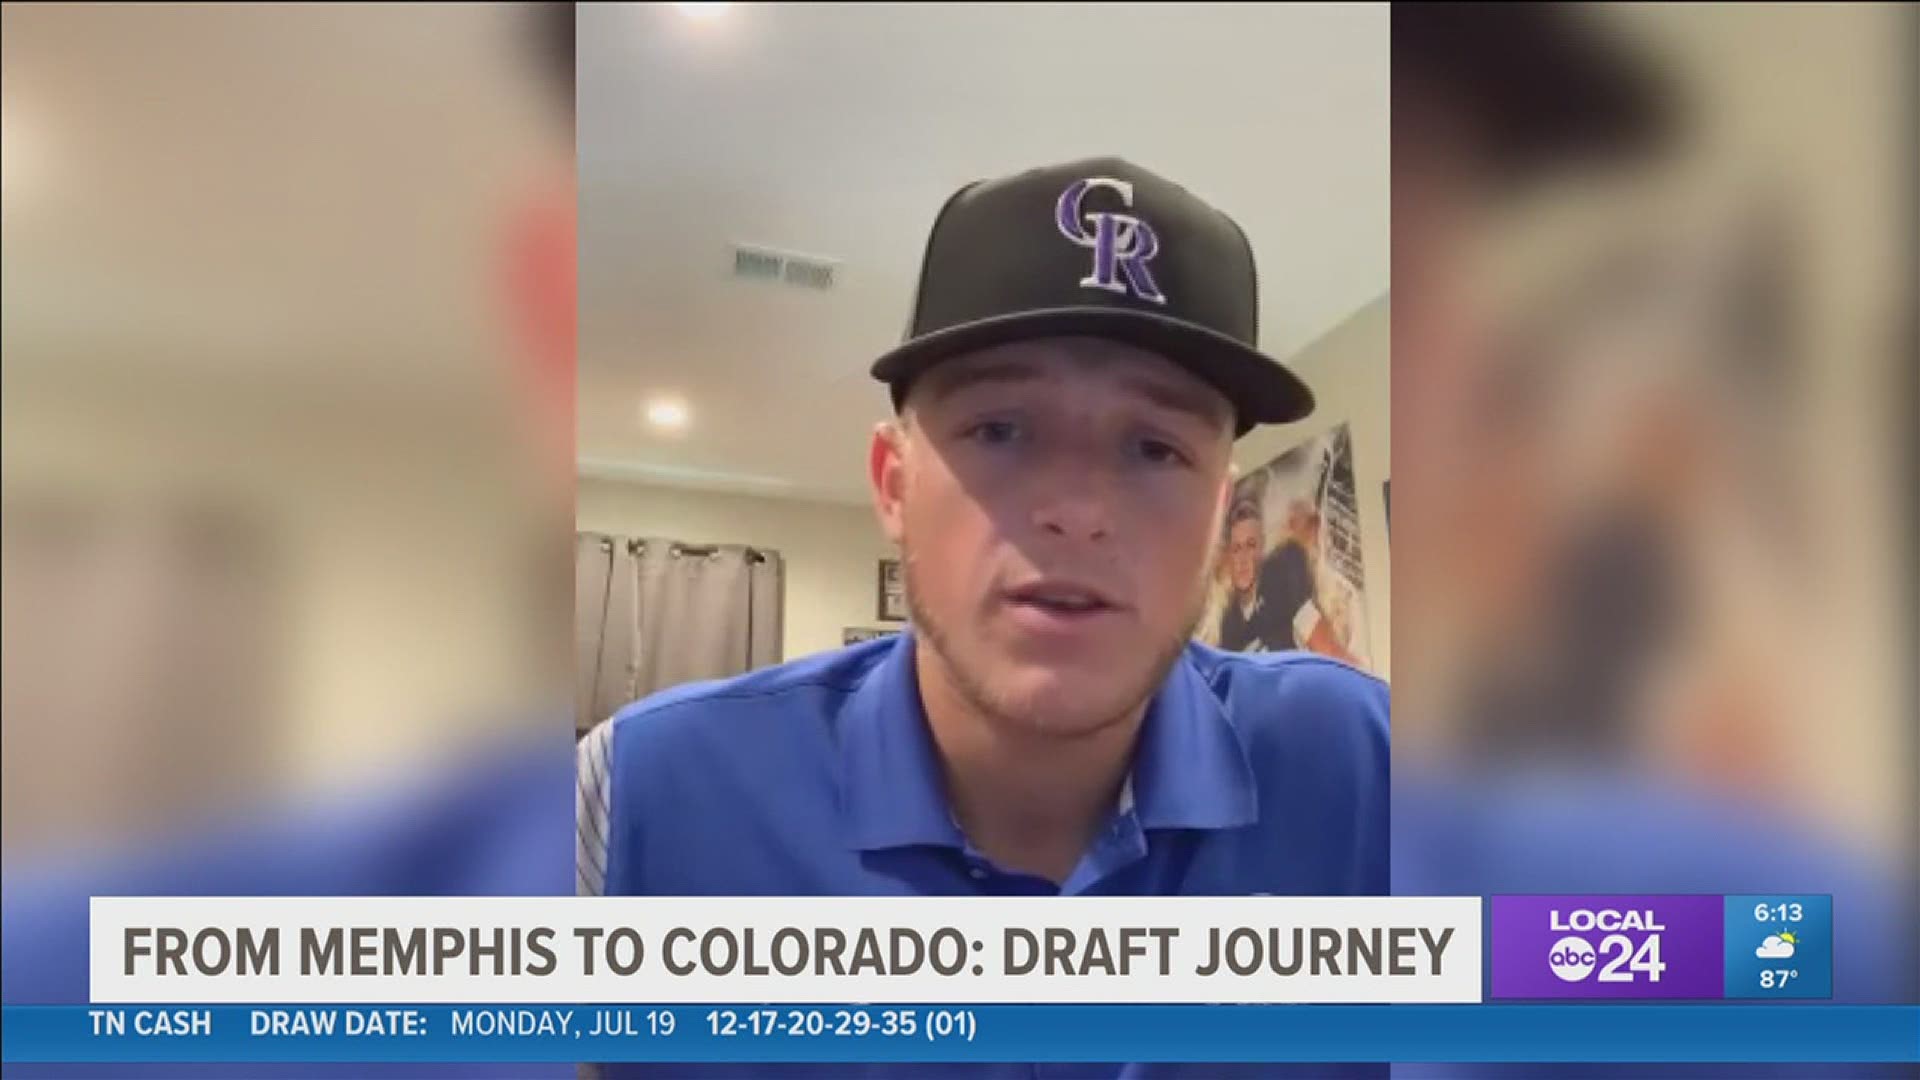 Goodman doubled as a catcher and top hitter for the University of Memphis. Now, the homerun record holder for the Tigers is headed to the pros.